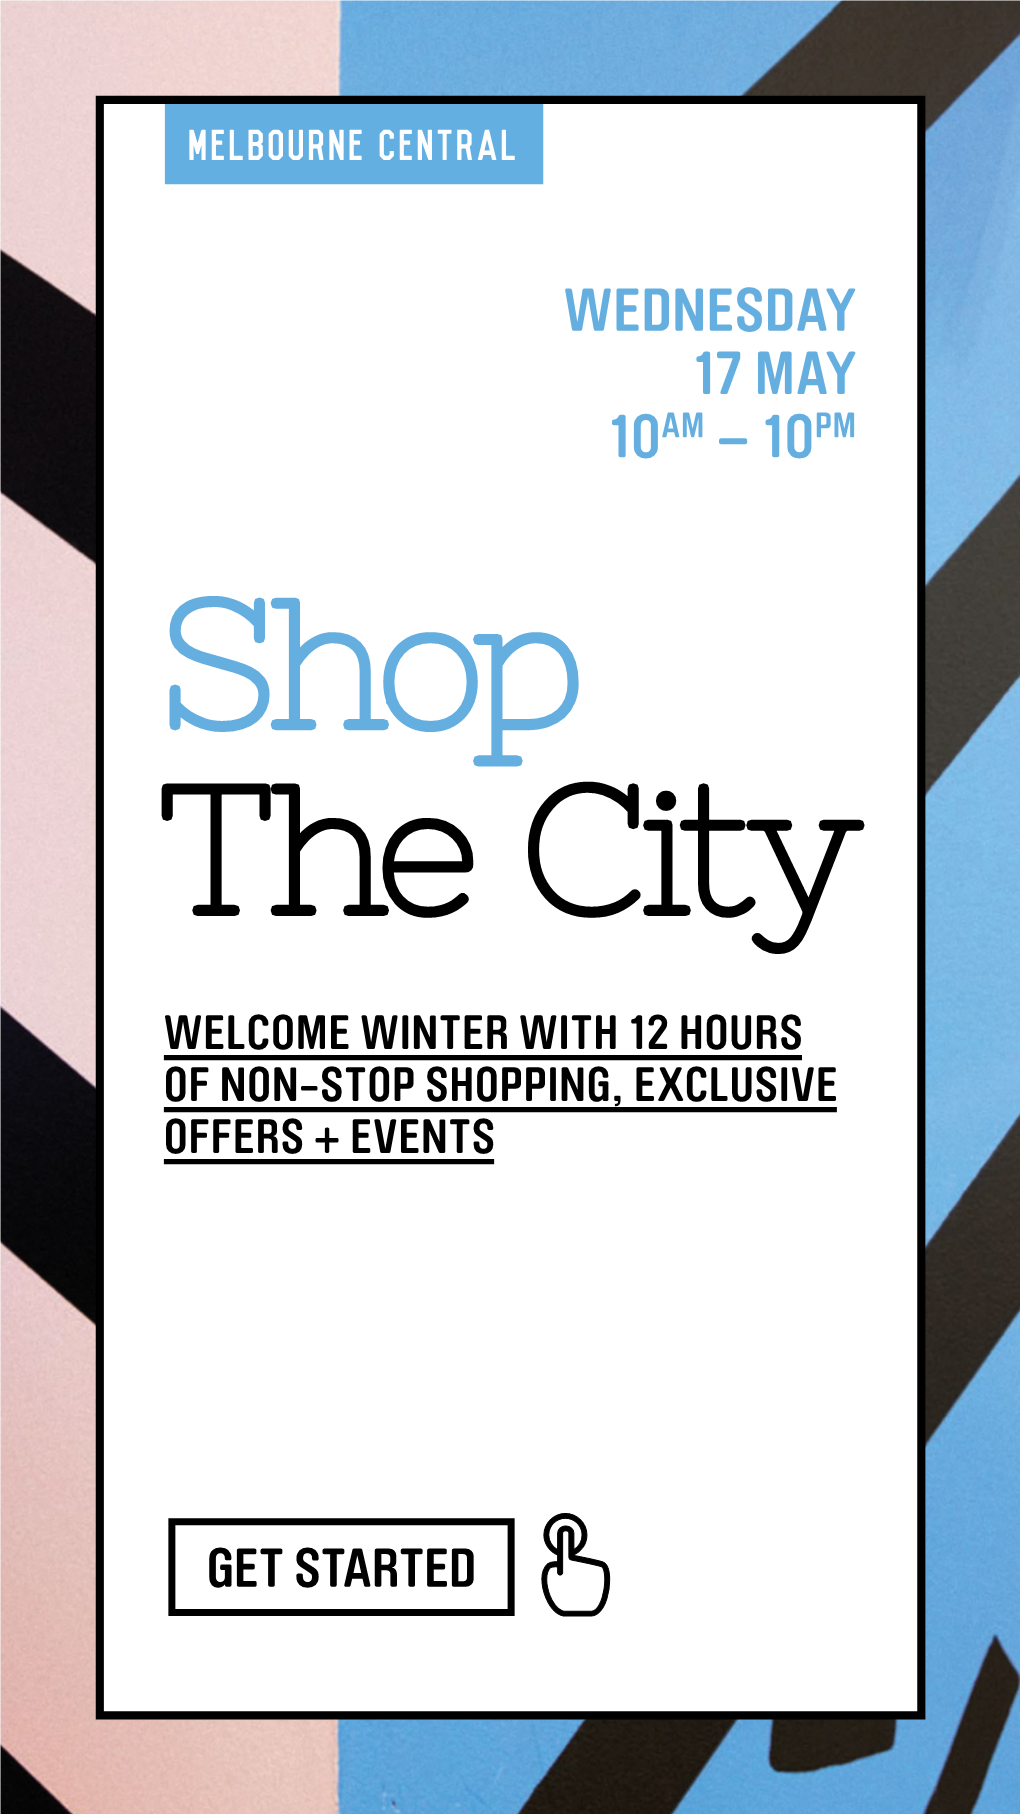 WEDNESDAY 17 MAY 10AM – 10PM Shop the City